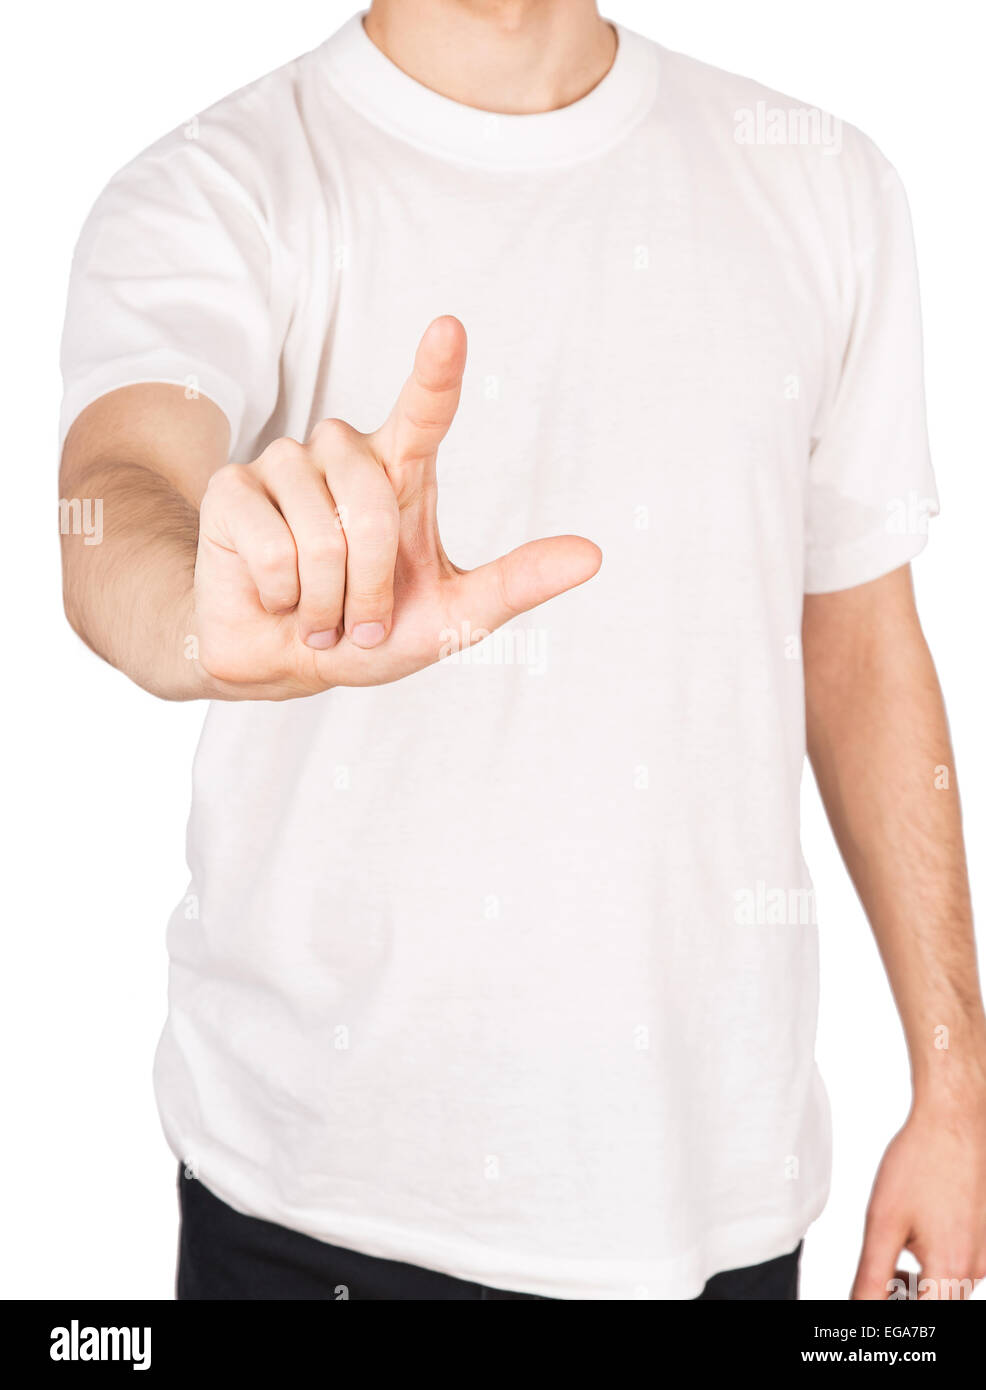 man T-shirt touch Isolated on white background Stock Photo